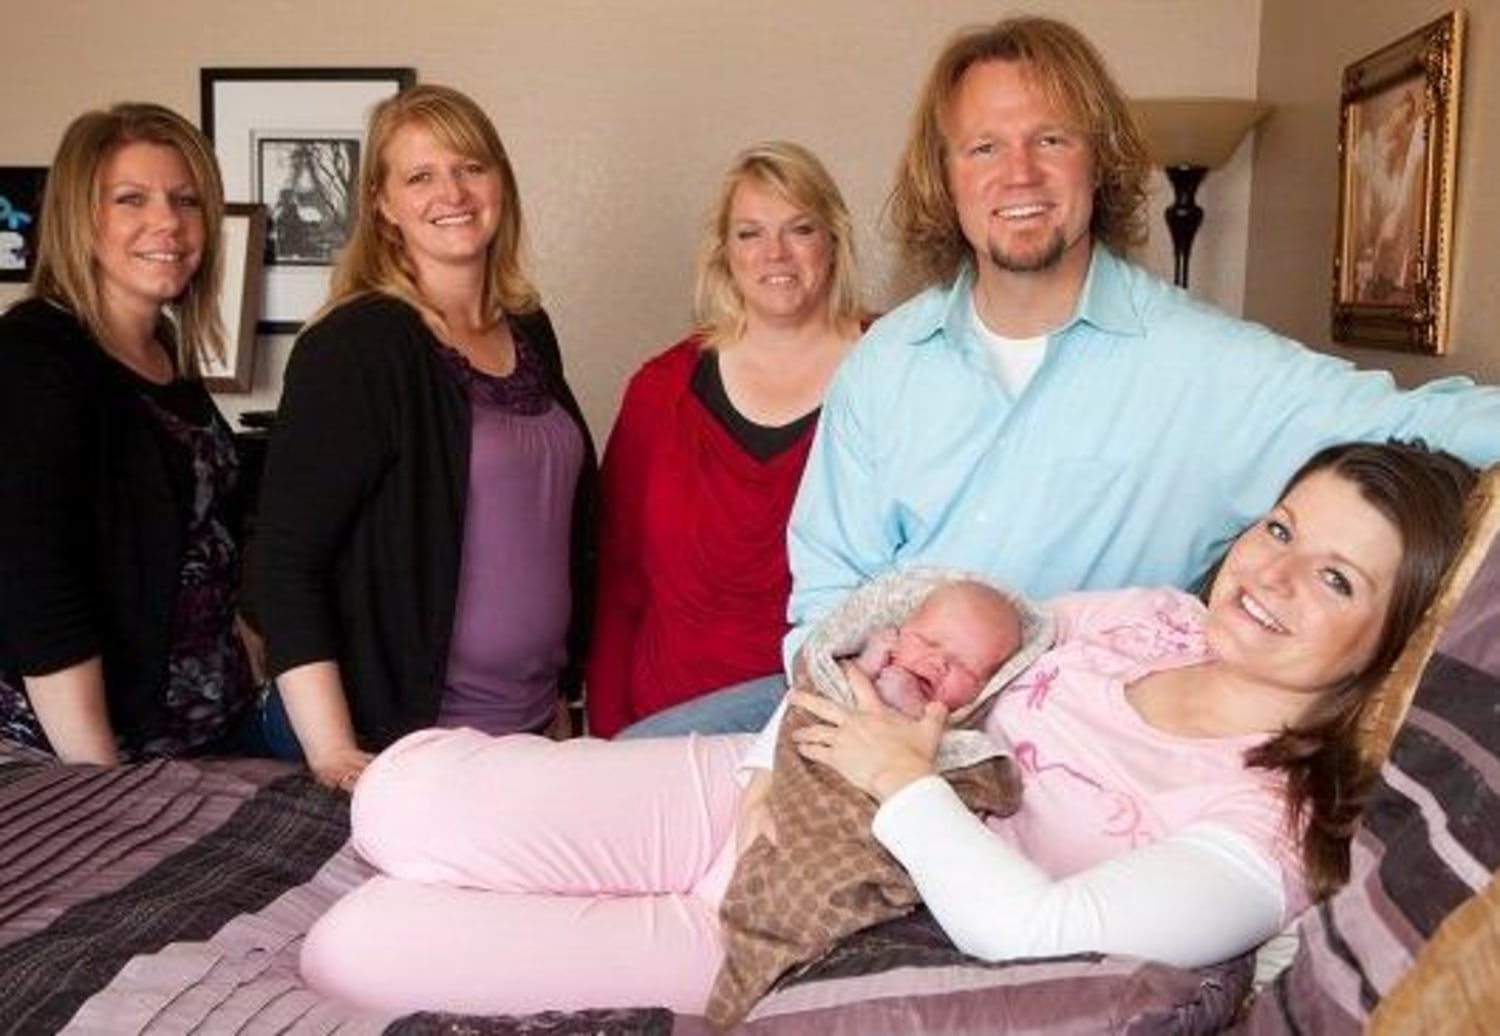 Meet the newest member of the Sister Wives family pic